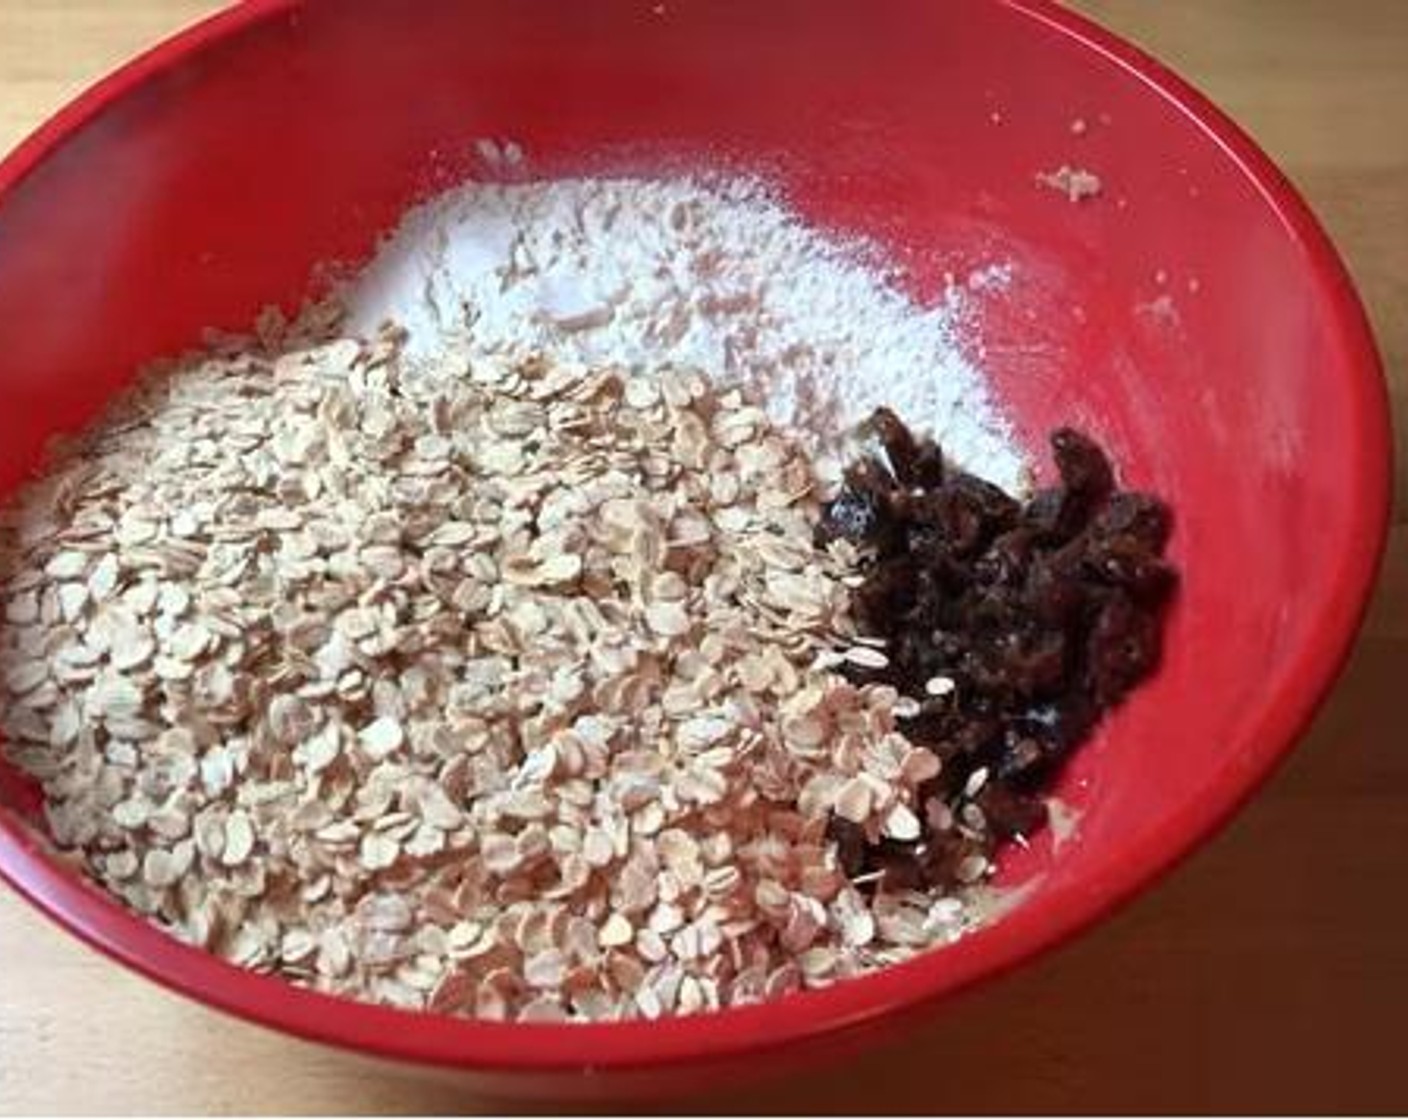 step 3 Add in and mix the Ground Cinnamon (1 tsp), All-Purpose Flour (1 cup), softened dates, and Old Fashioned Rolled Oats (3 1/2 cups).